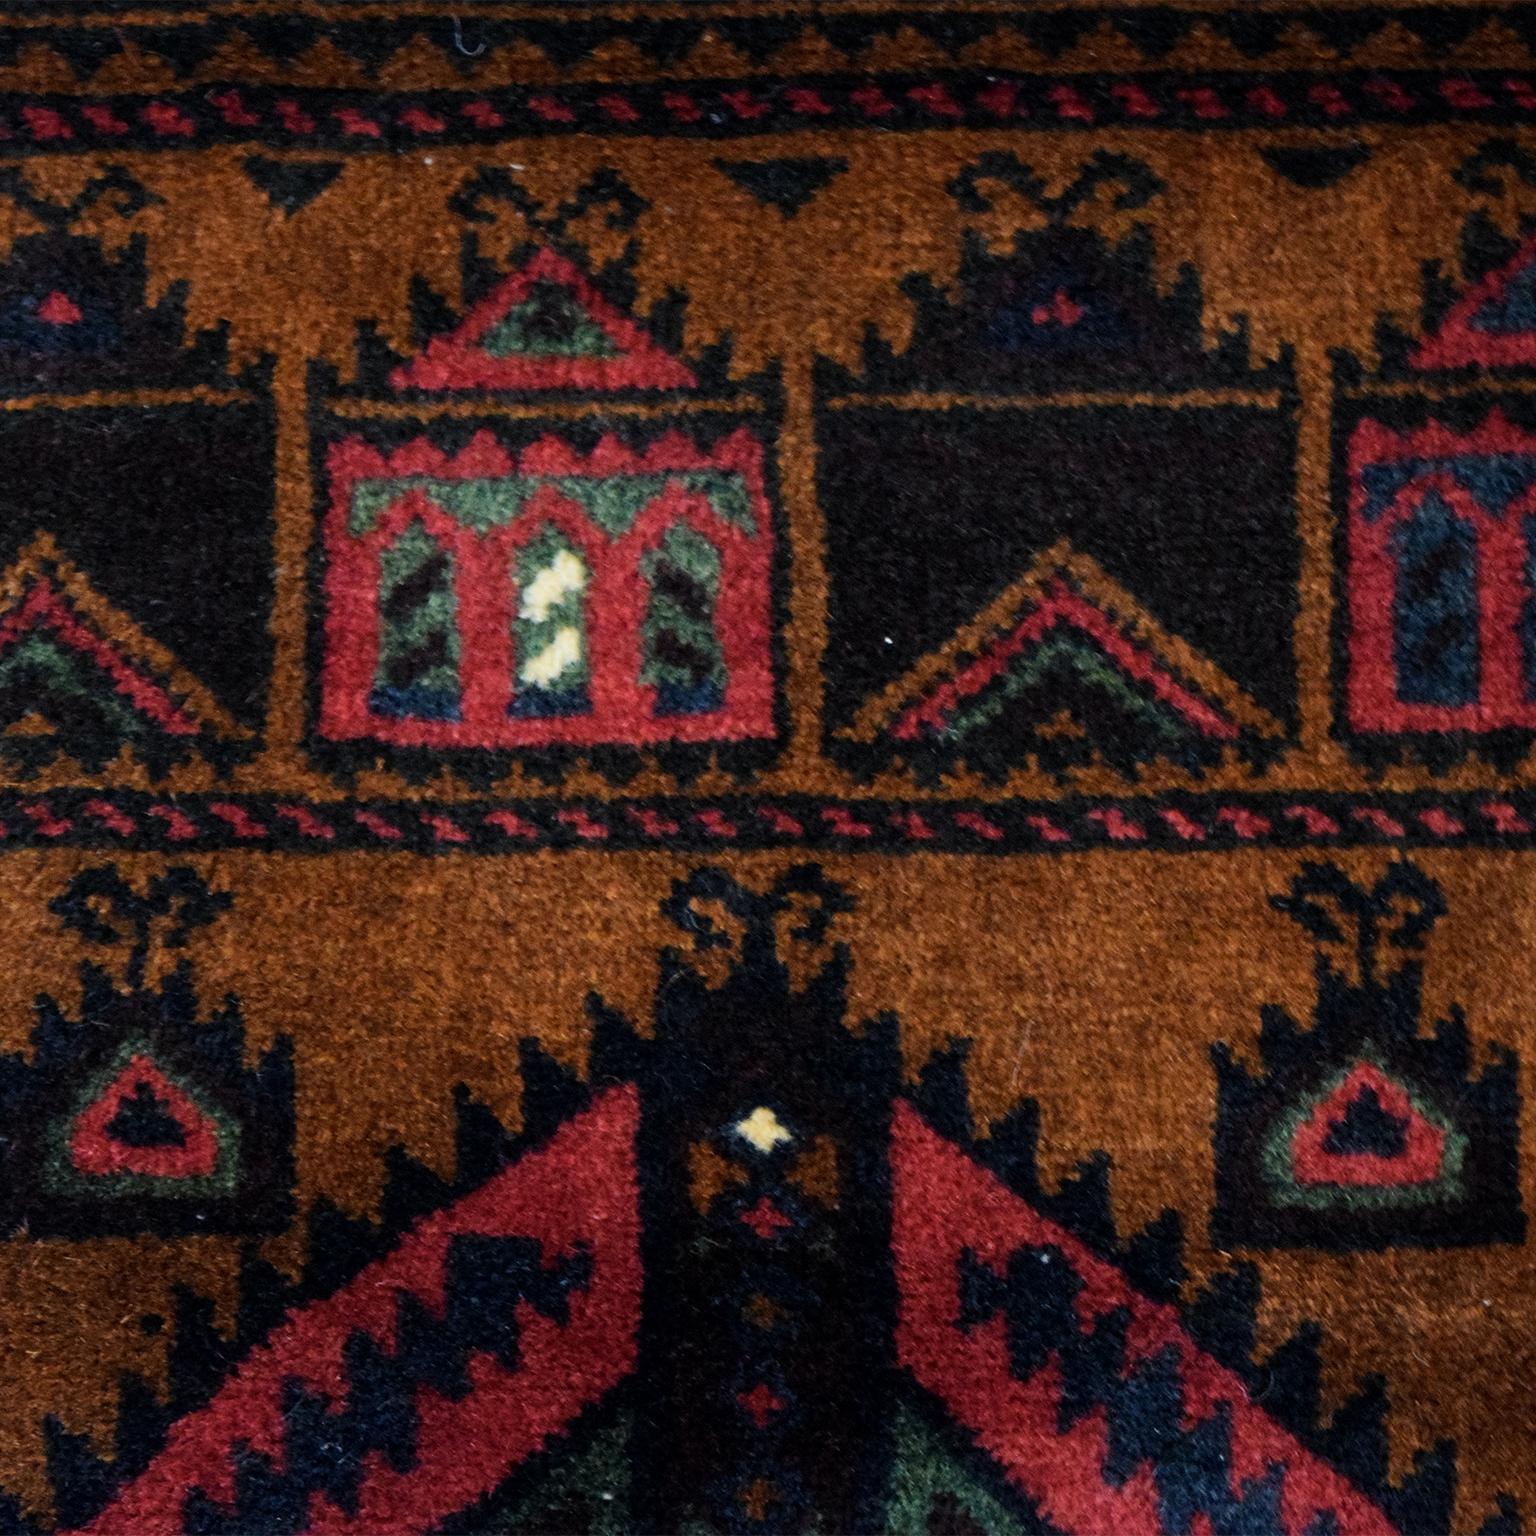 With harmonious shades of gold, black, green, red, and blue wool, this Persian Balouchi carpet belongs to Orley Shabahang’s World Market Collection. Measuring 2’11” x 4’4”, this carpet is entirely hand knotted using a traditional Persian weaving